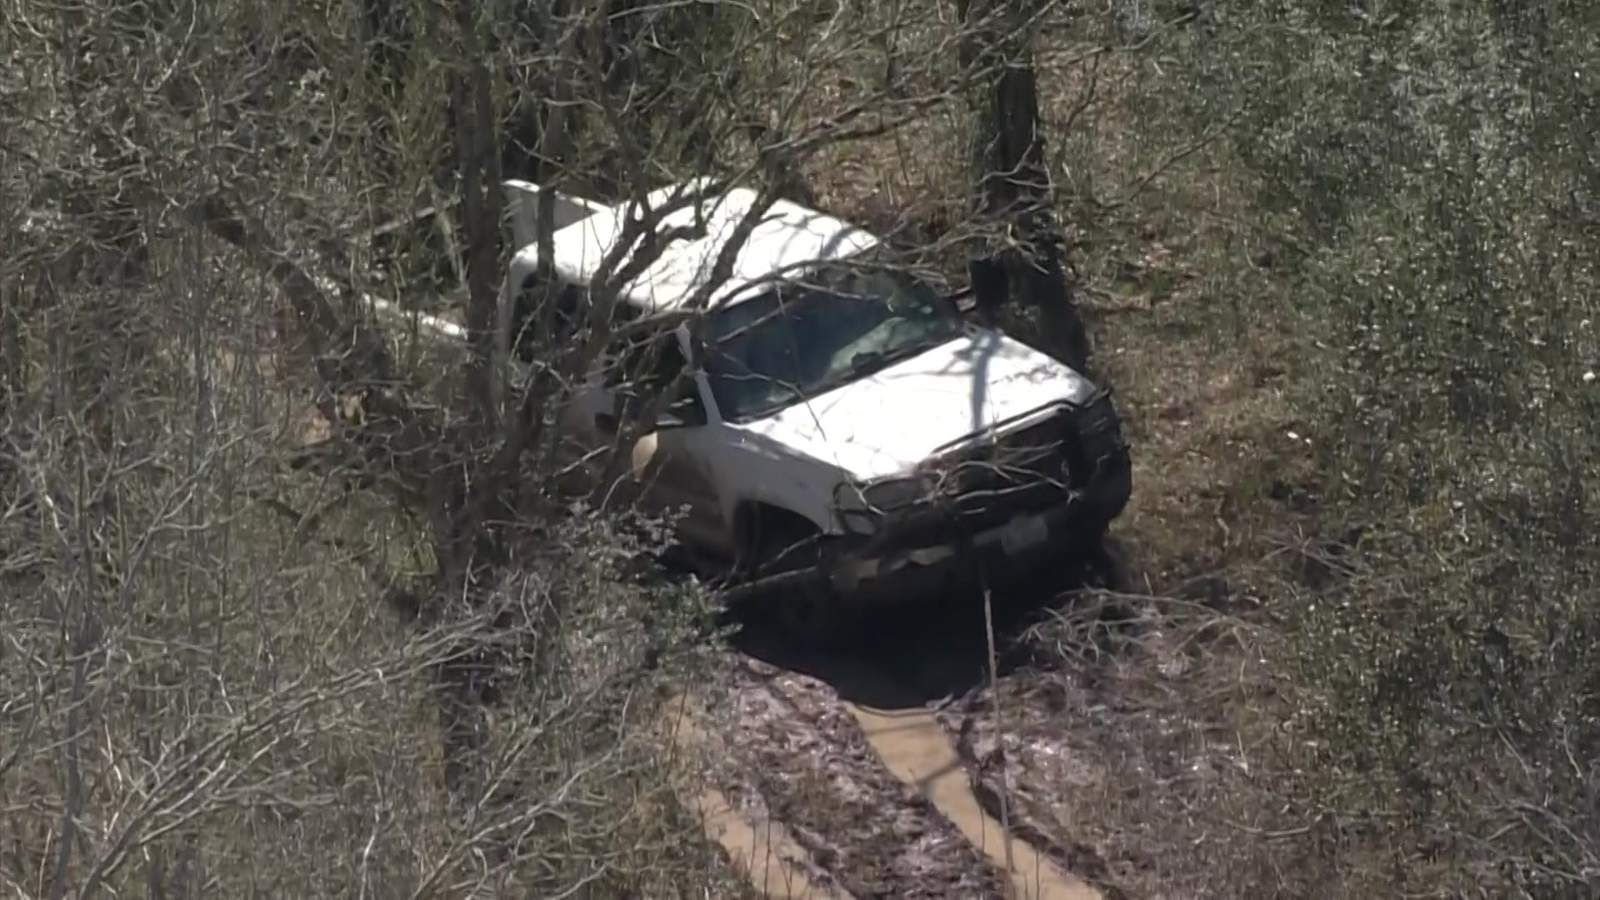 At least 10 people bail from stolen truck during chase in Brazoria County